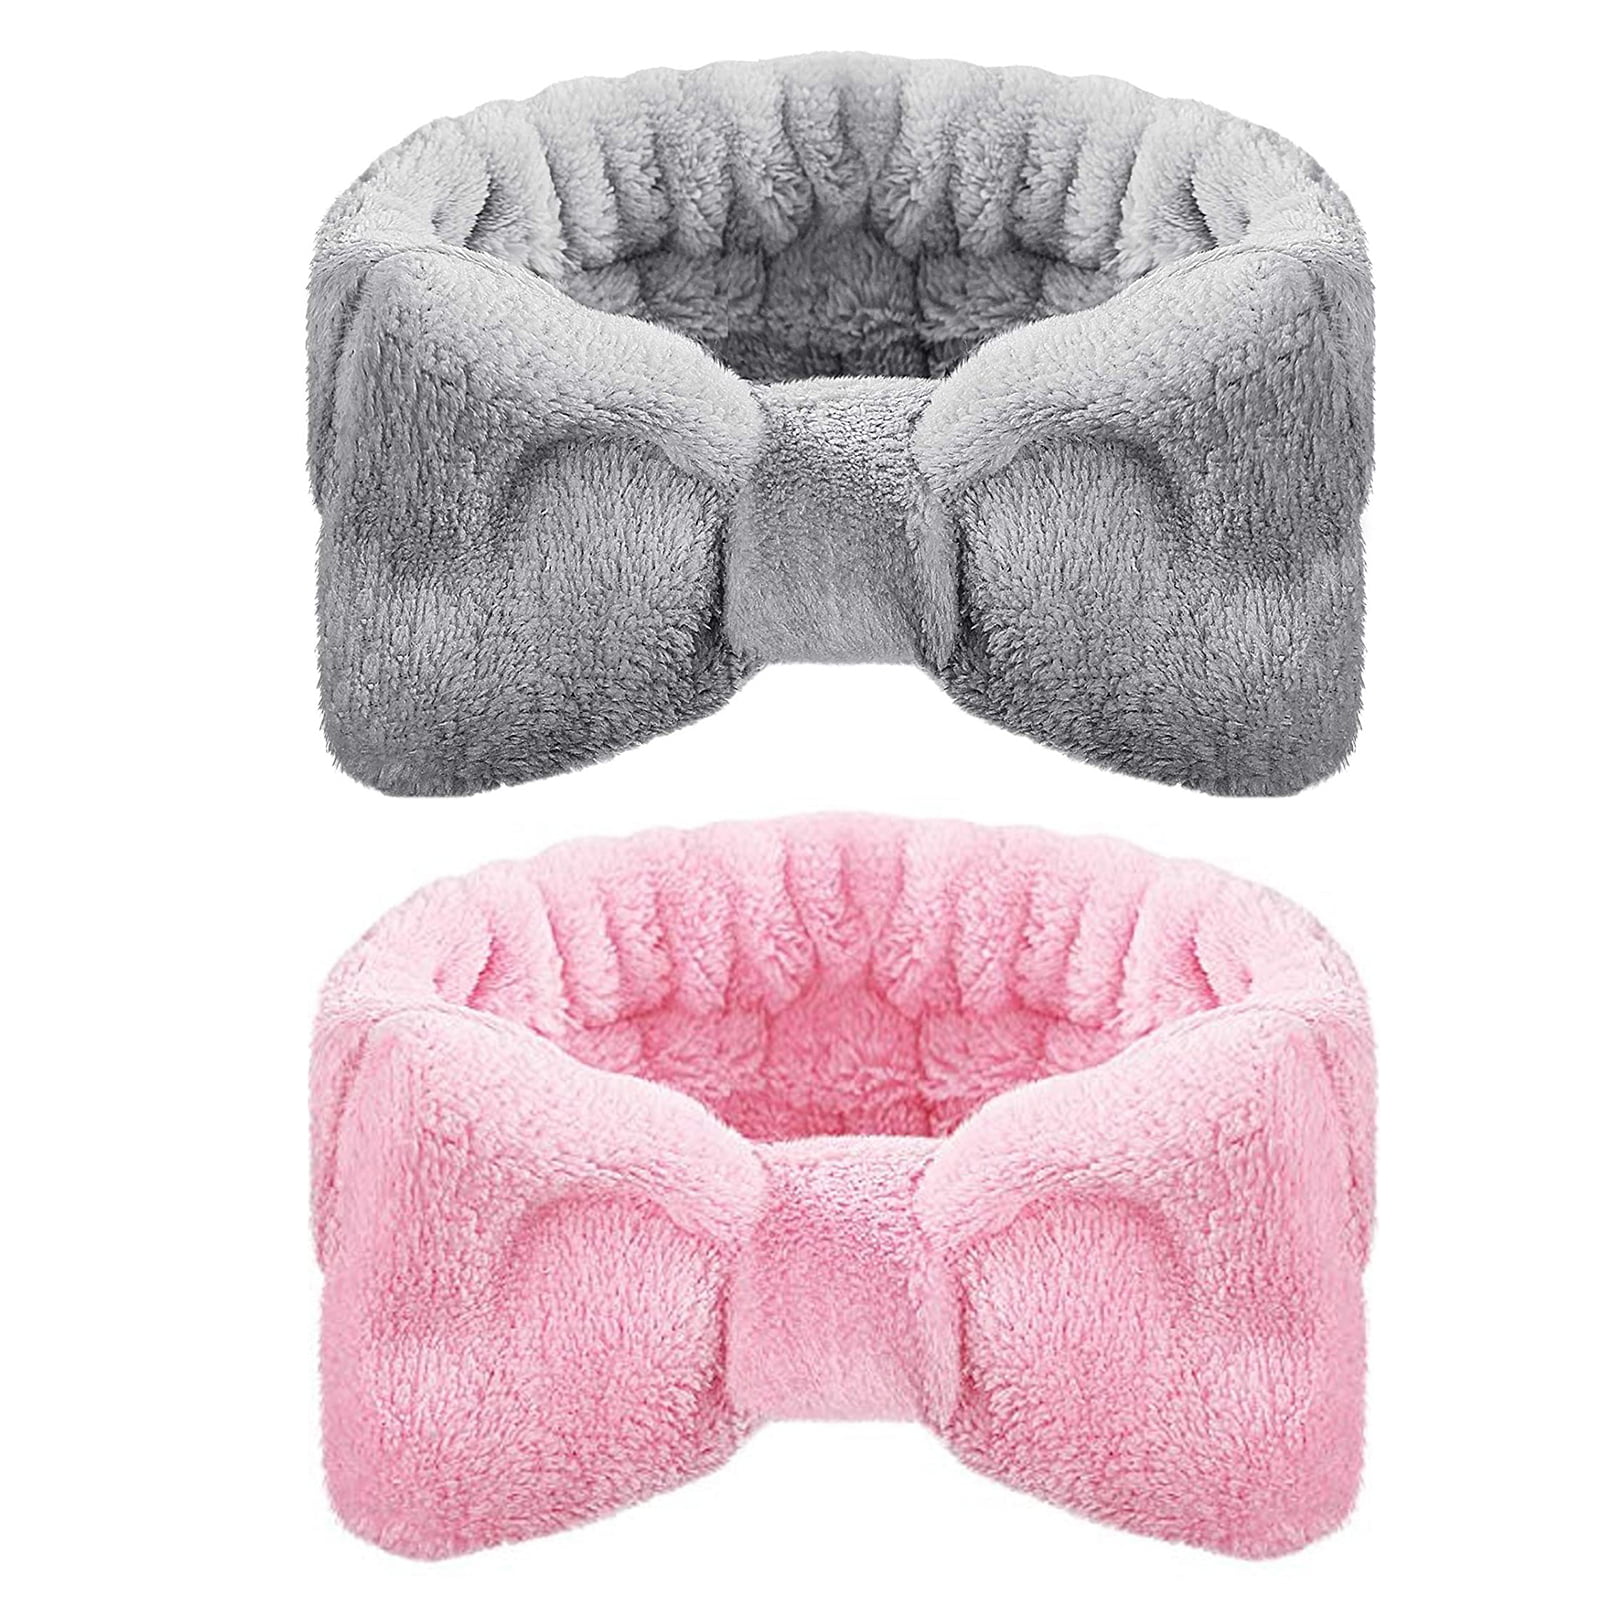 Winter Coral Fluffy Turban Makeup Face Wash Belt Soft Turban Hair Band Cute  Headband with Bow-knot Shape for Home Washing Face Makeup 